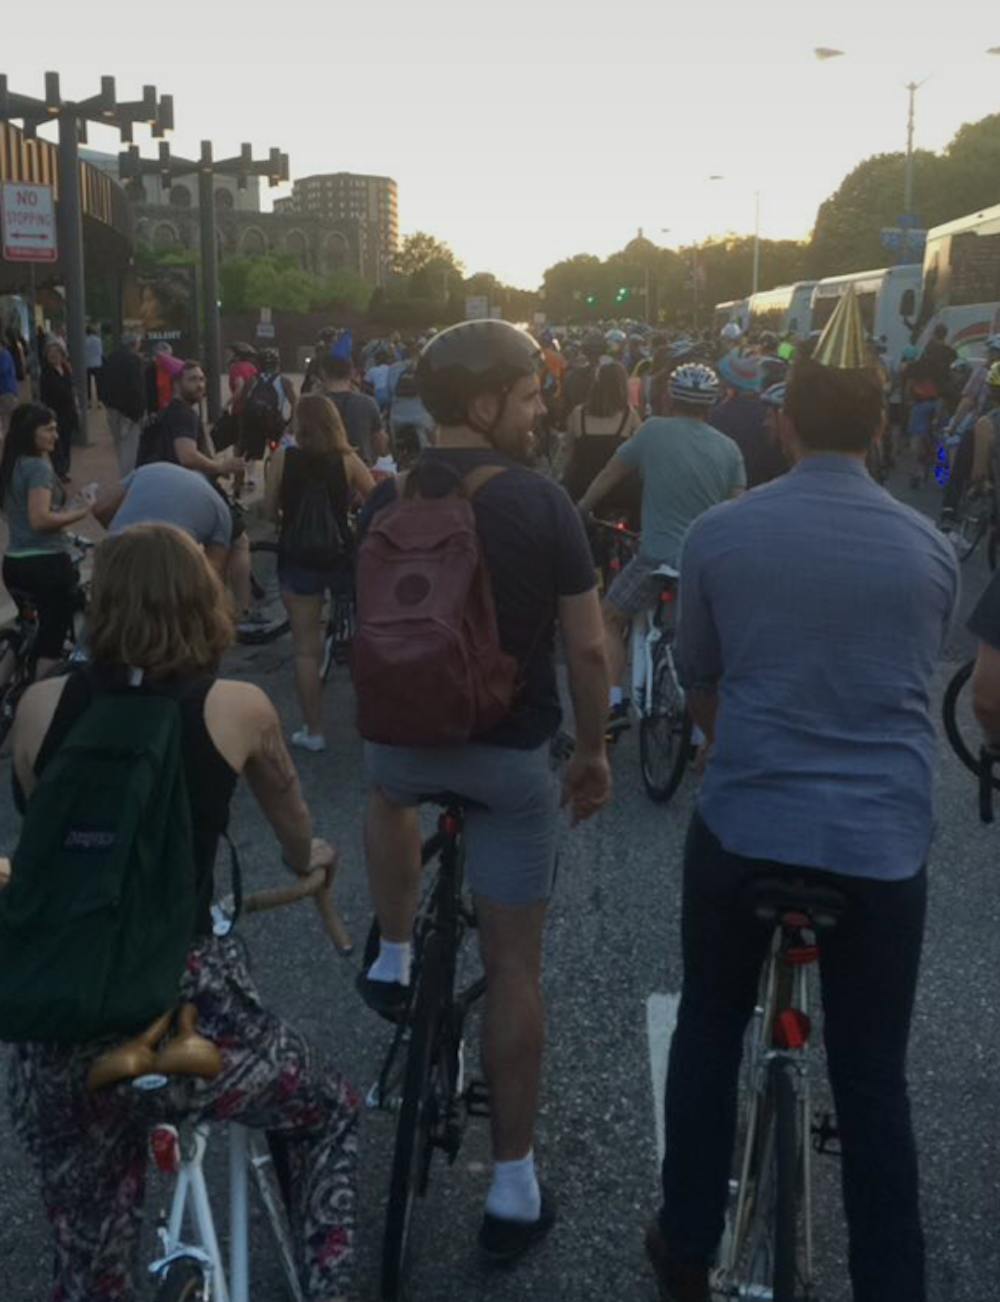 COURTESY OF HANNAH MELTON
Bike Party brings Baltimoreans from all over the city all through the city.